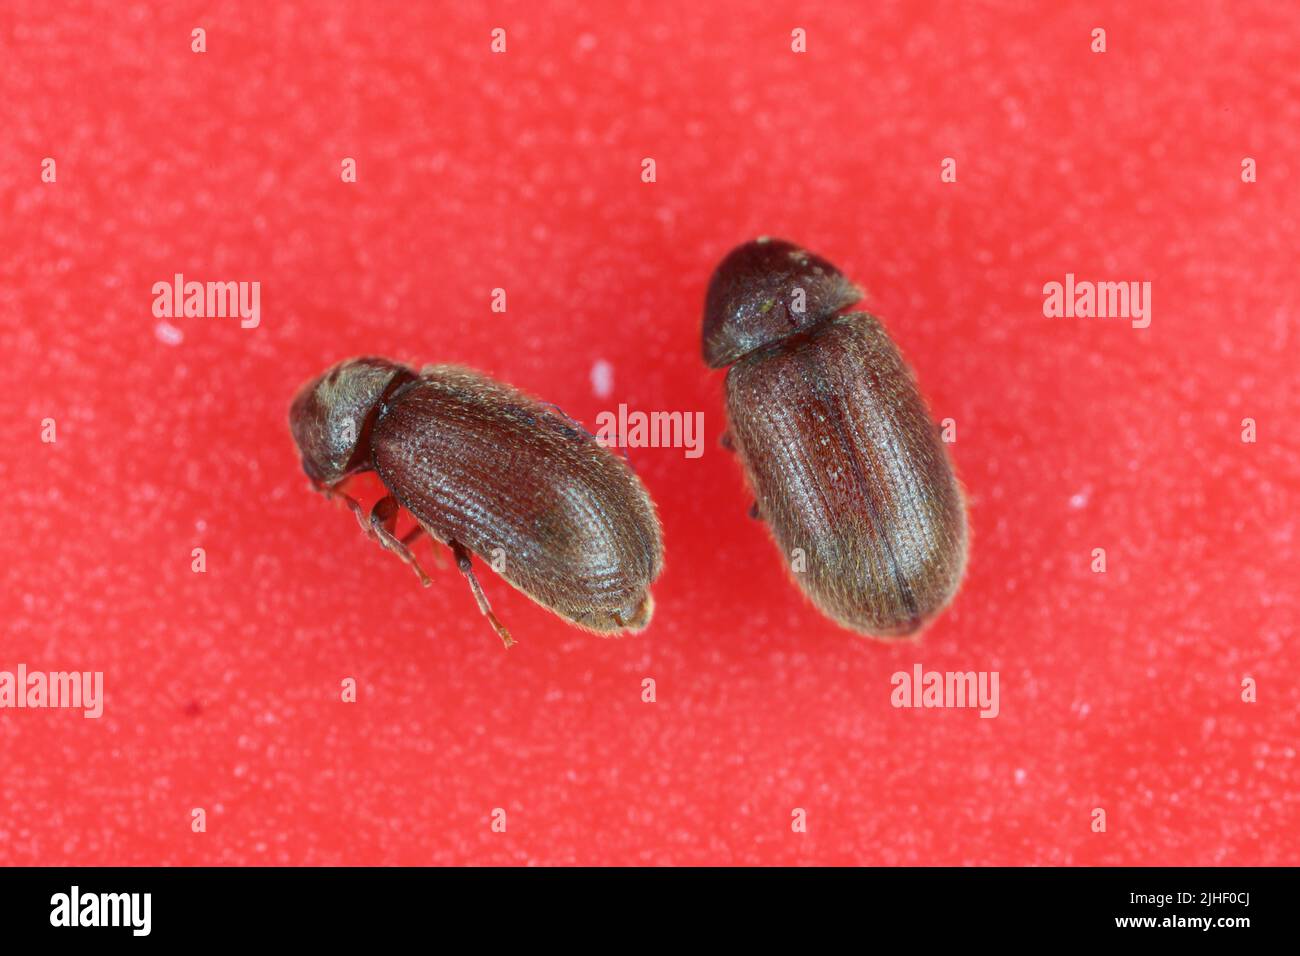 The drugstore beetles (Stegobium paniceum), also known as the bread beetle or biscuit beetle from family Anobiidae. Stock Photo